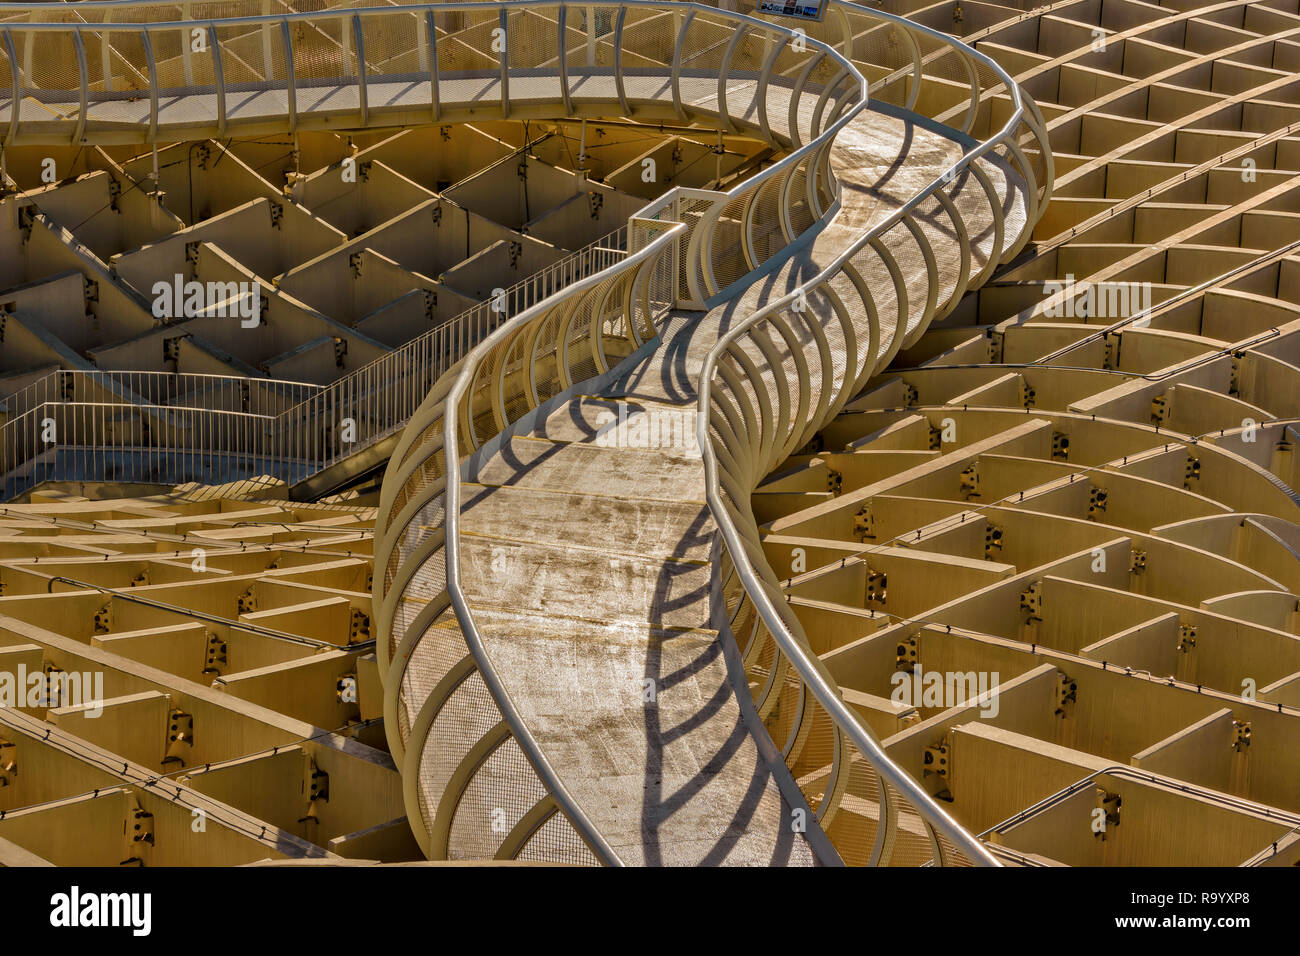 METROPOL PARASOL LA ENCARNACION SQUARE SEVILLE SPAIN CURVING WALKWAY ON THE TOP OF THE STRUCTURE Stock Photo